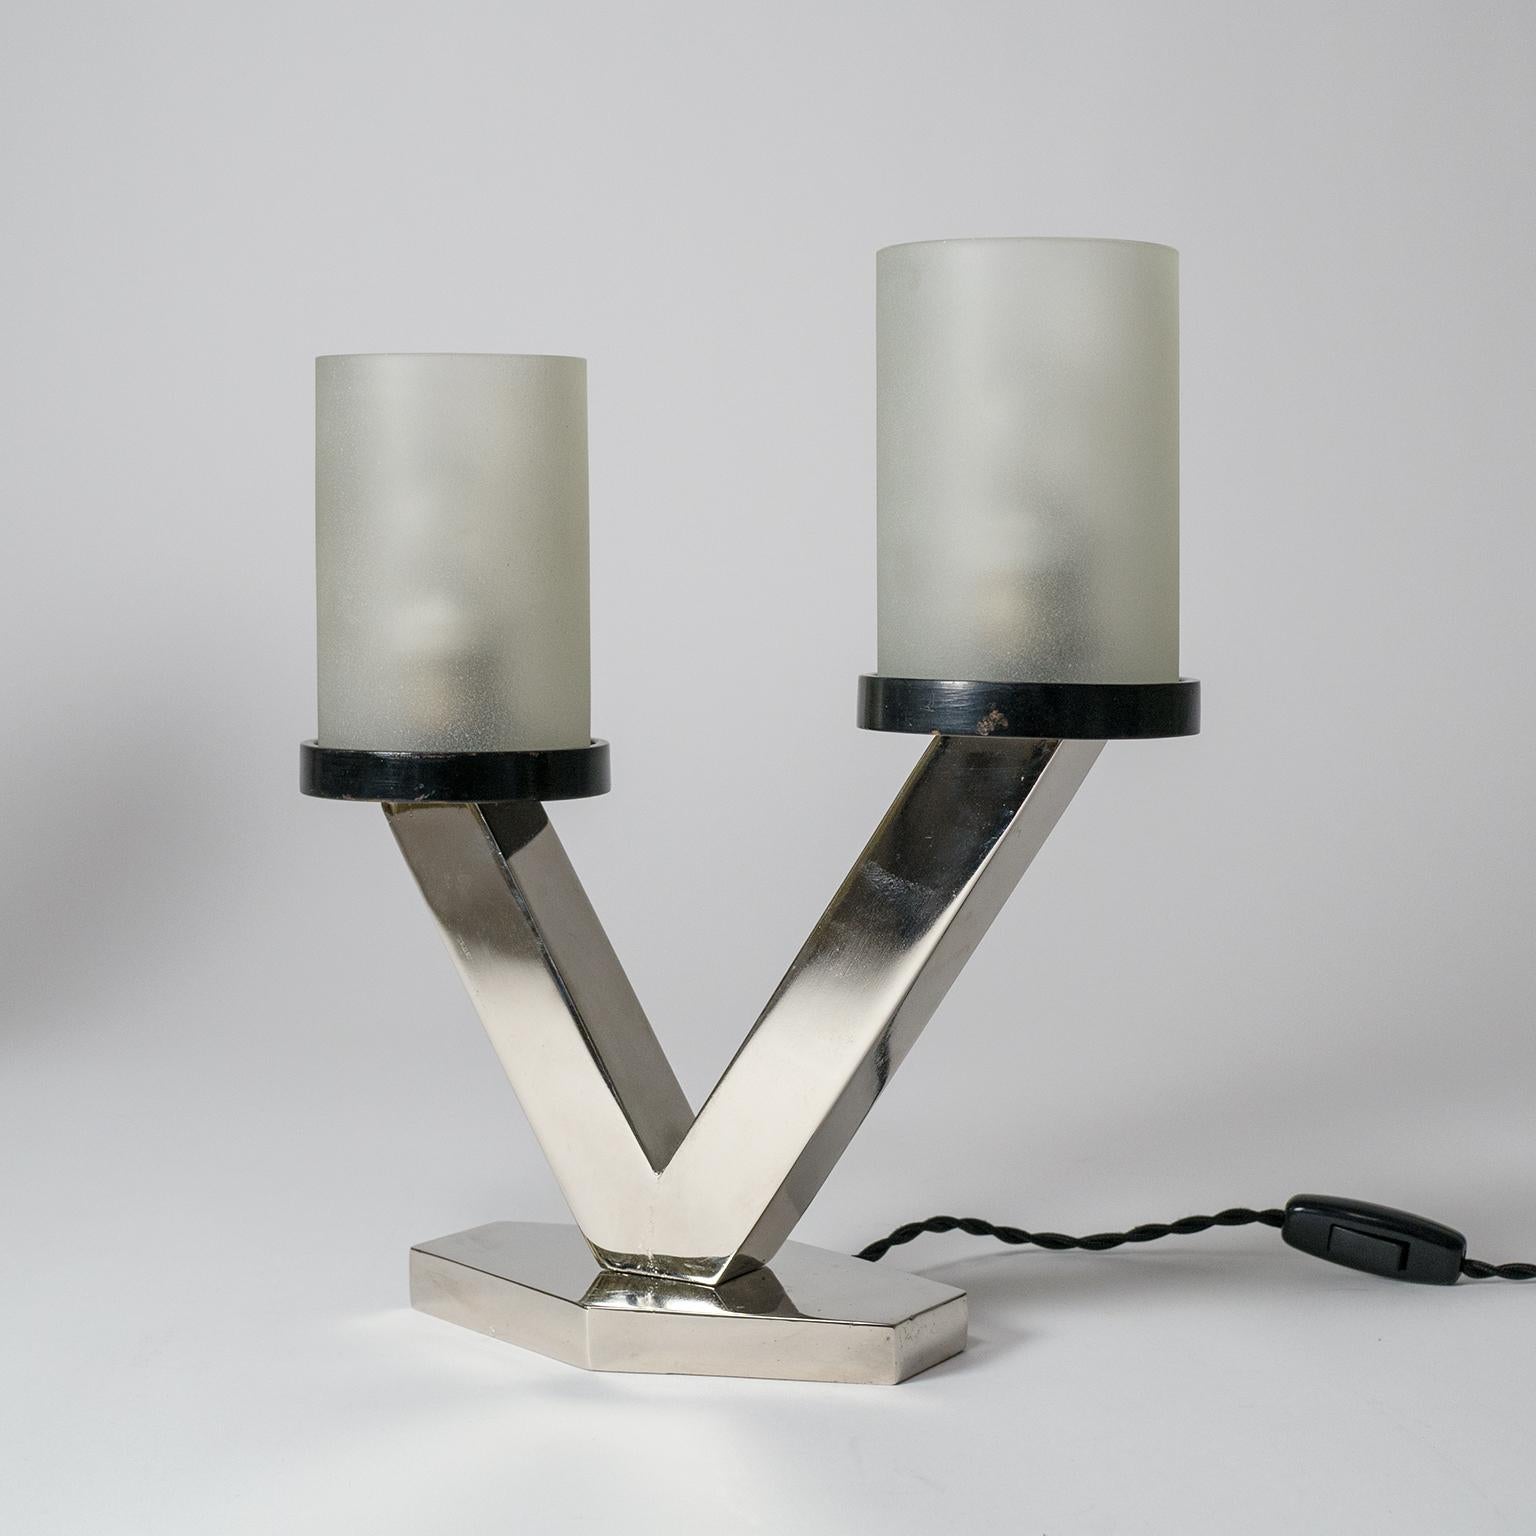 1920s Art Deco Table Lamps, Nickel and Glass 7